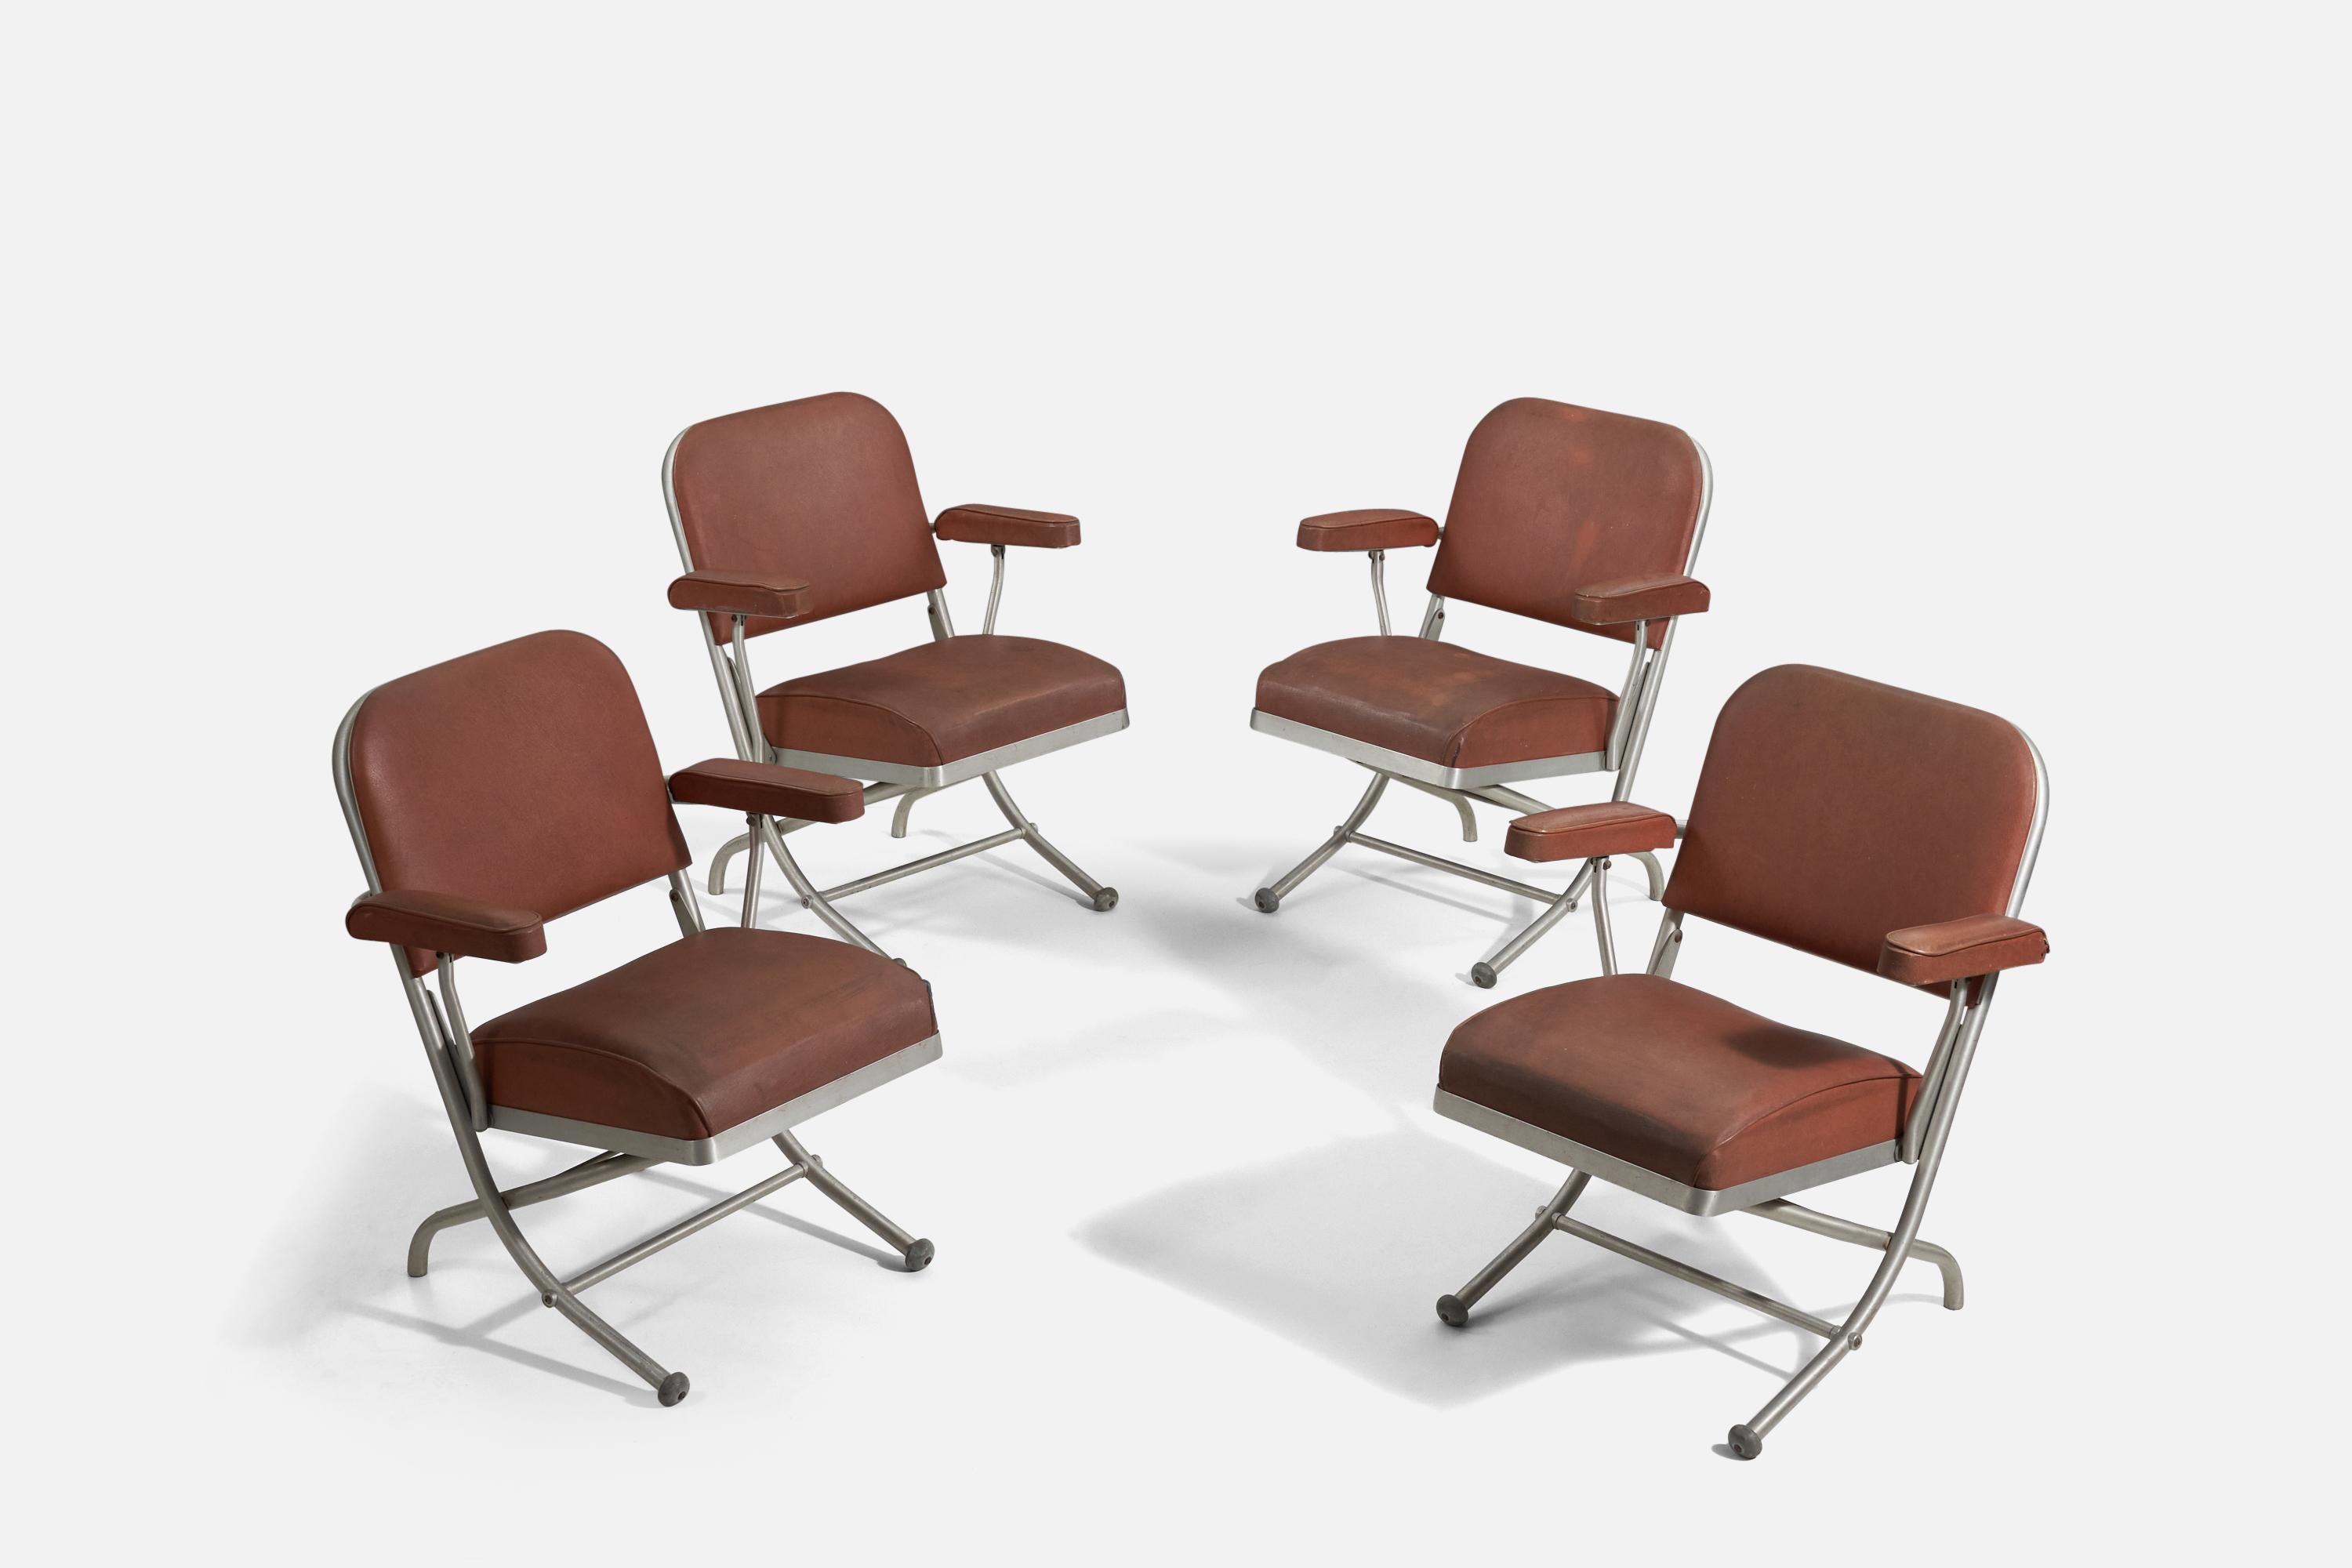 A set of steel and vinyl chairs, created by Warren McArthur, United States, 1930s.